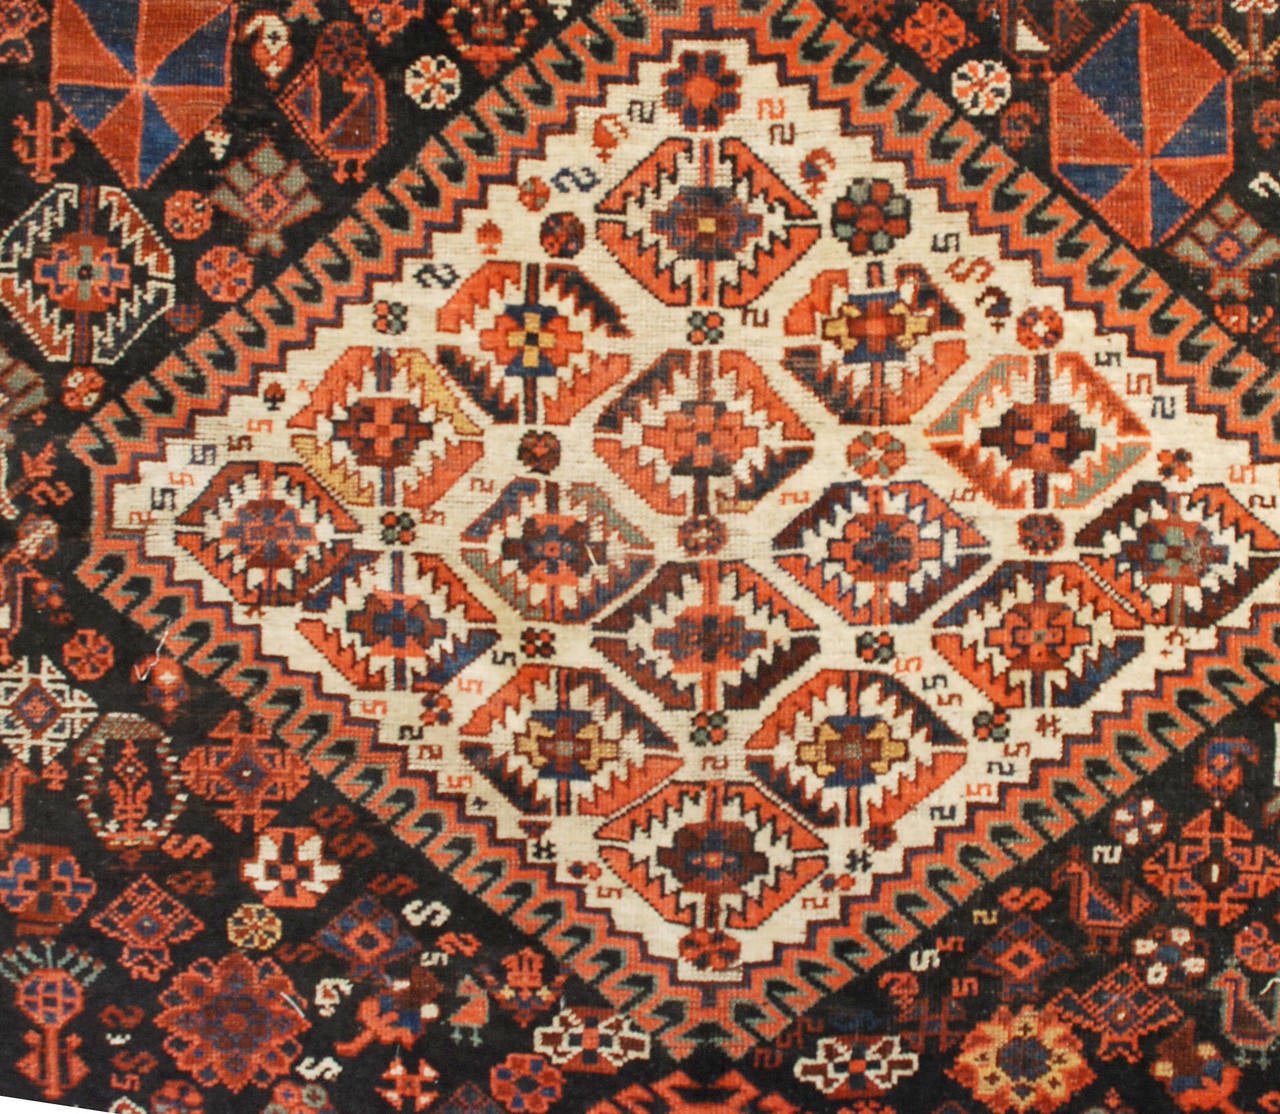 A wonderful late 19th century Gashgai rug with three large diamond medallions amidst an amazing field of flowers, chickens, and goats, surrounded by an intricate system of contrasting floral and geometric borders.